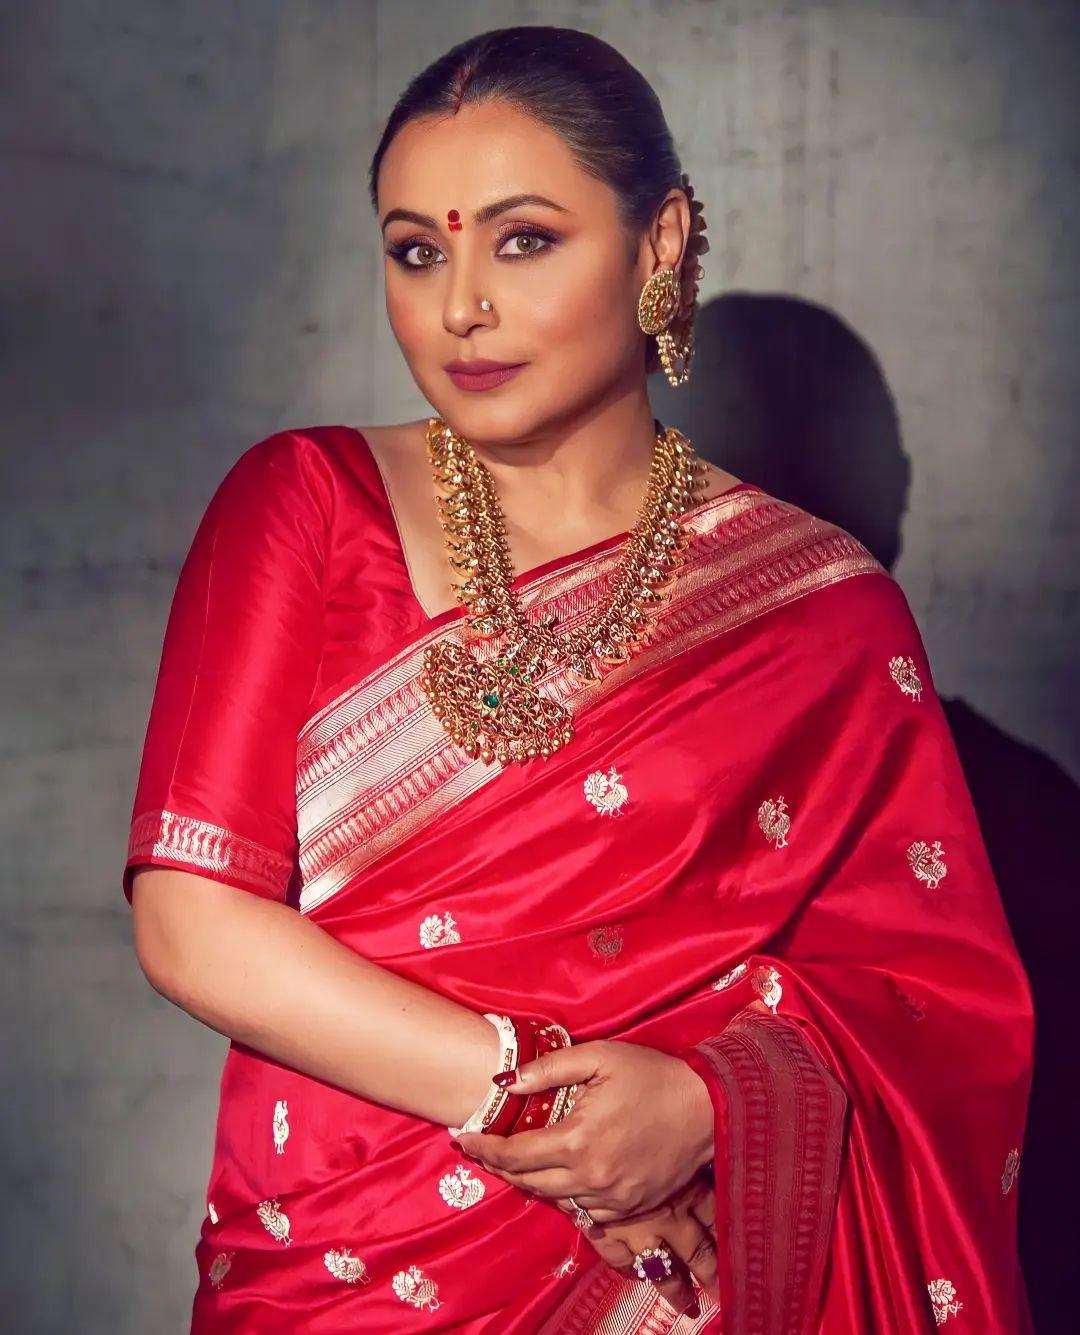 Rani Mukerji is a well-known actress famous for her incredible performances in movies like Mardaani, and Kuch Kuch Hota Hai.